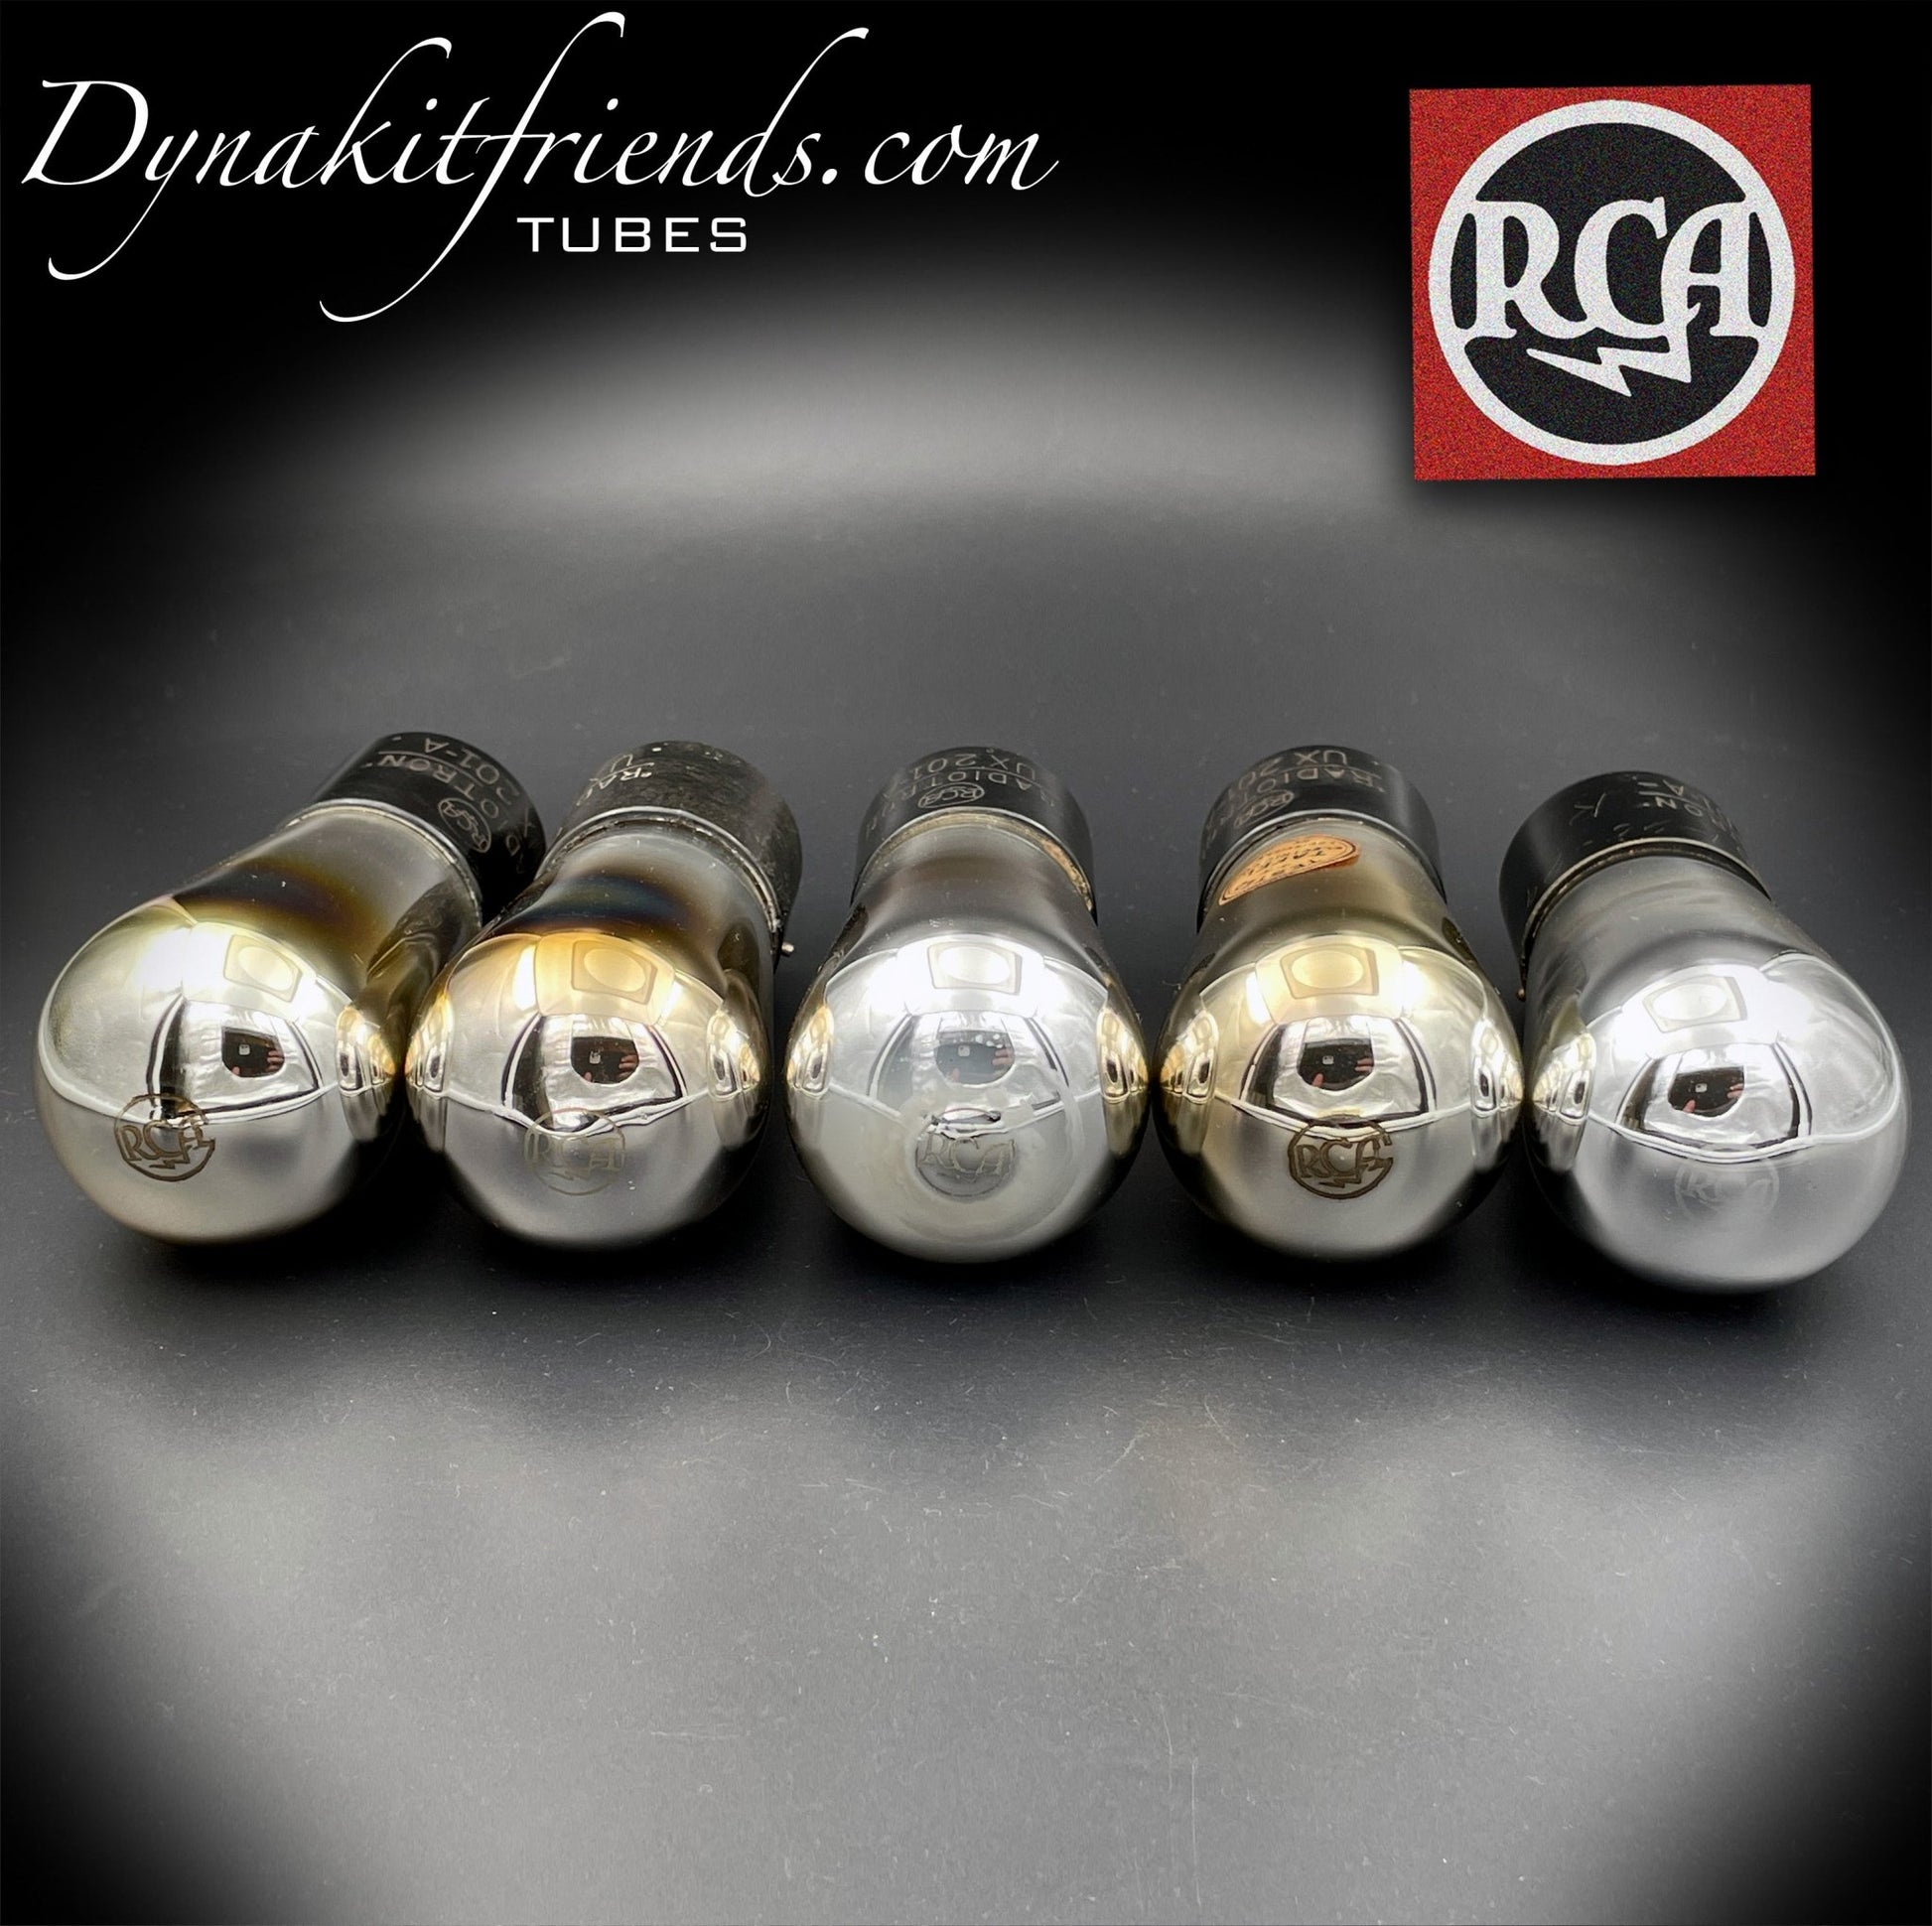 UX-201-A ( 01-A ) RCA Globe Atwater Kent Radio Tubes Test @ NOS specs Matched Tubes Made in USA '20s - Vacuum Tubes Treasures